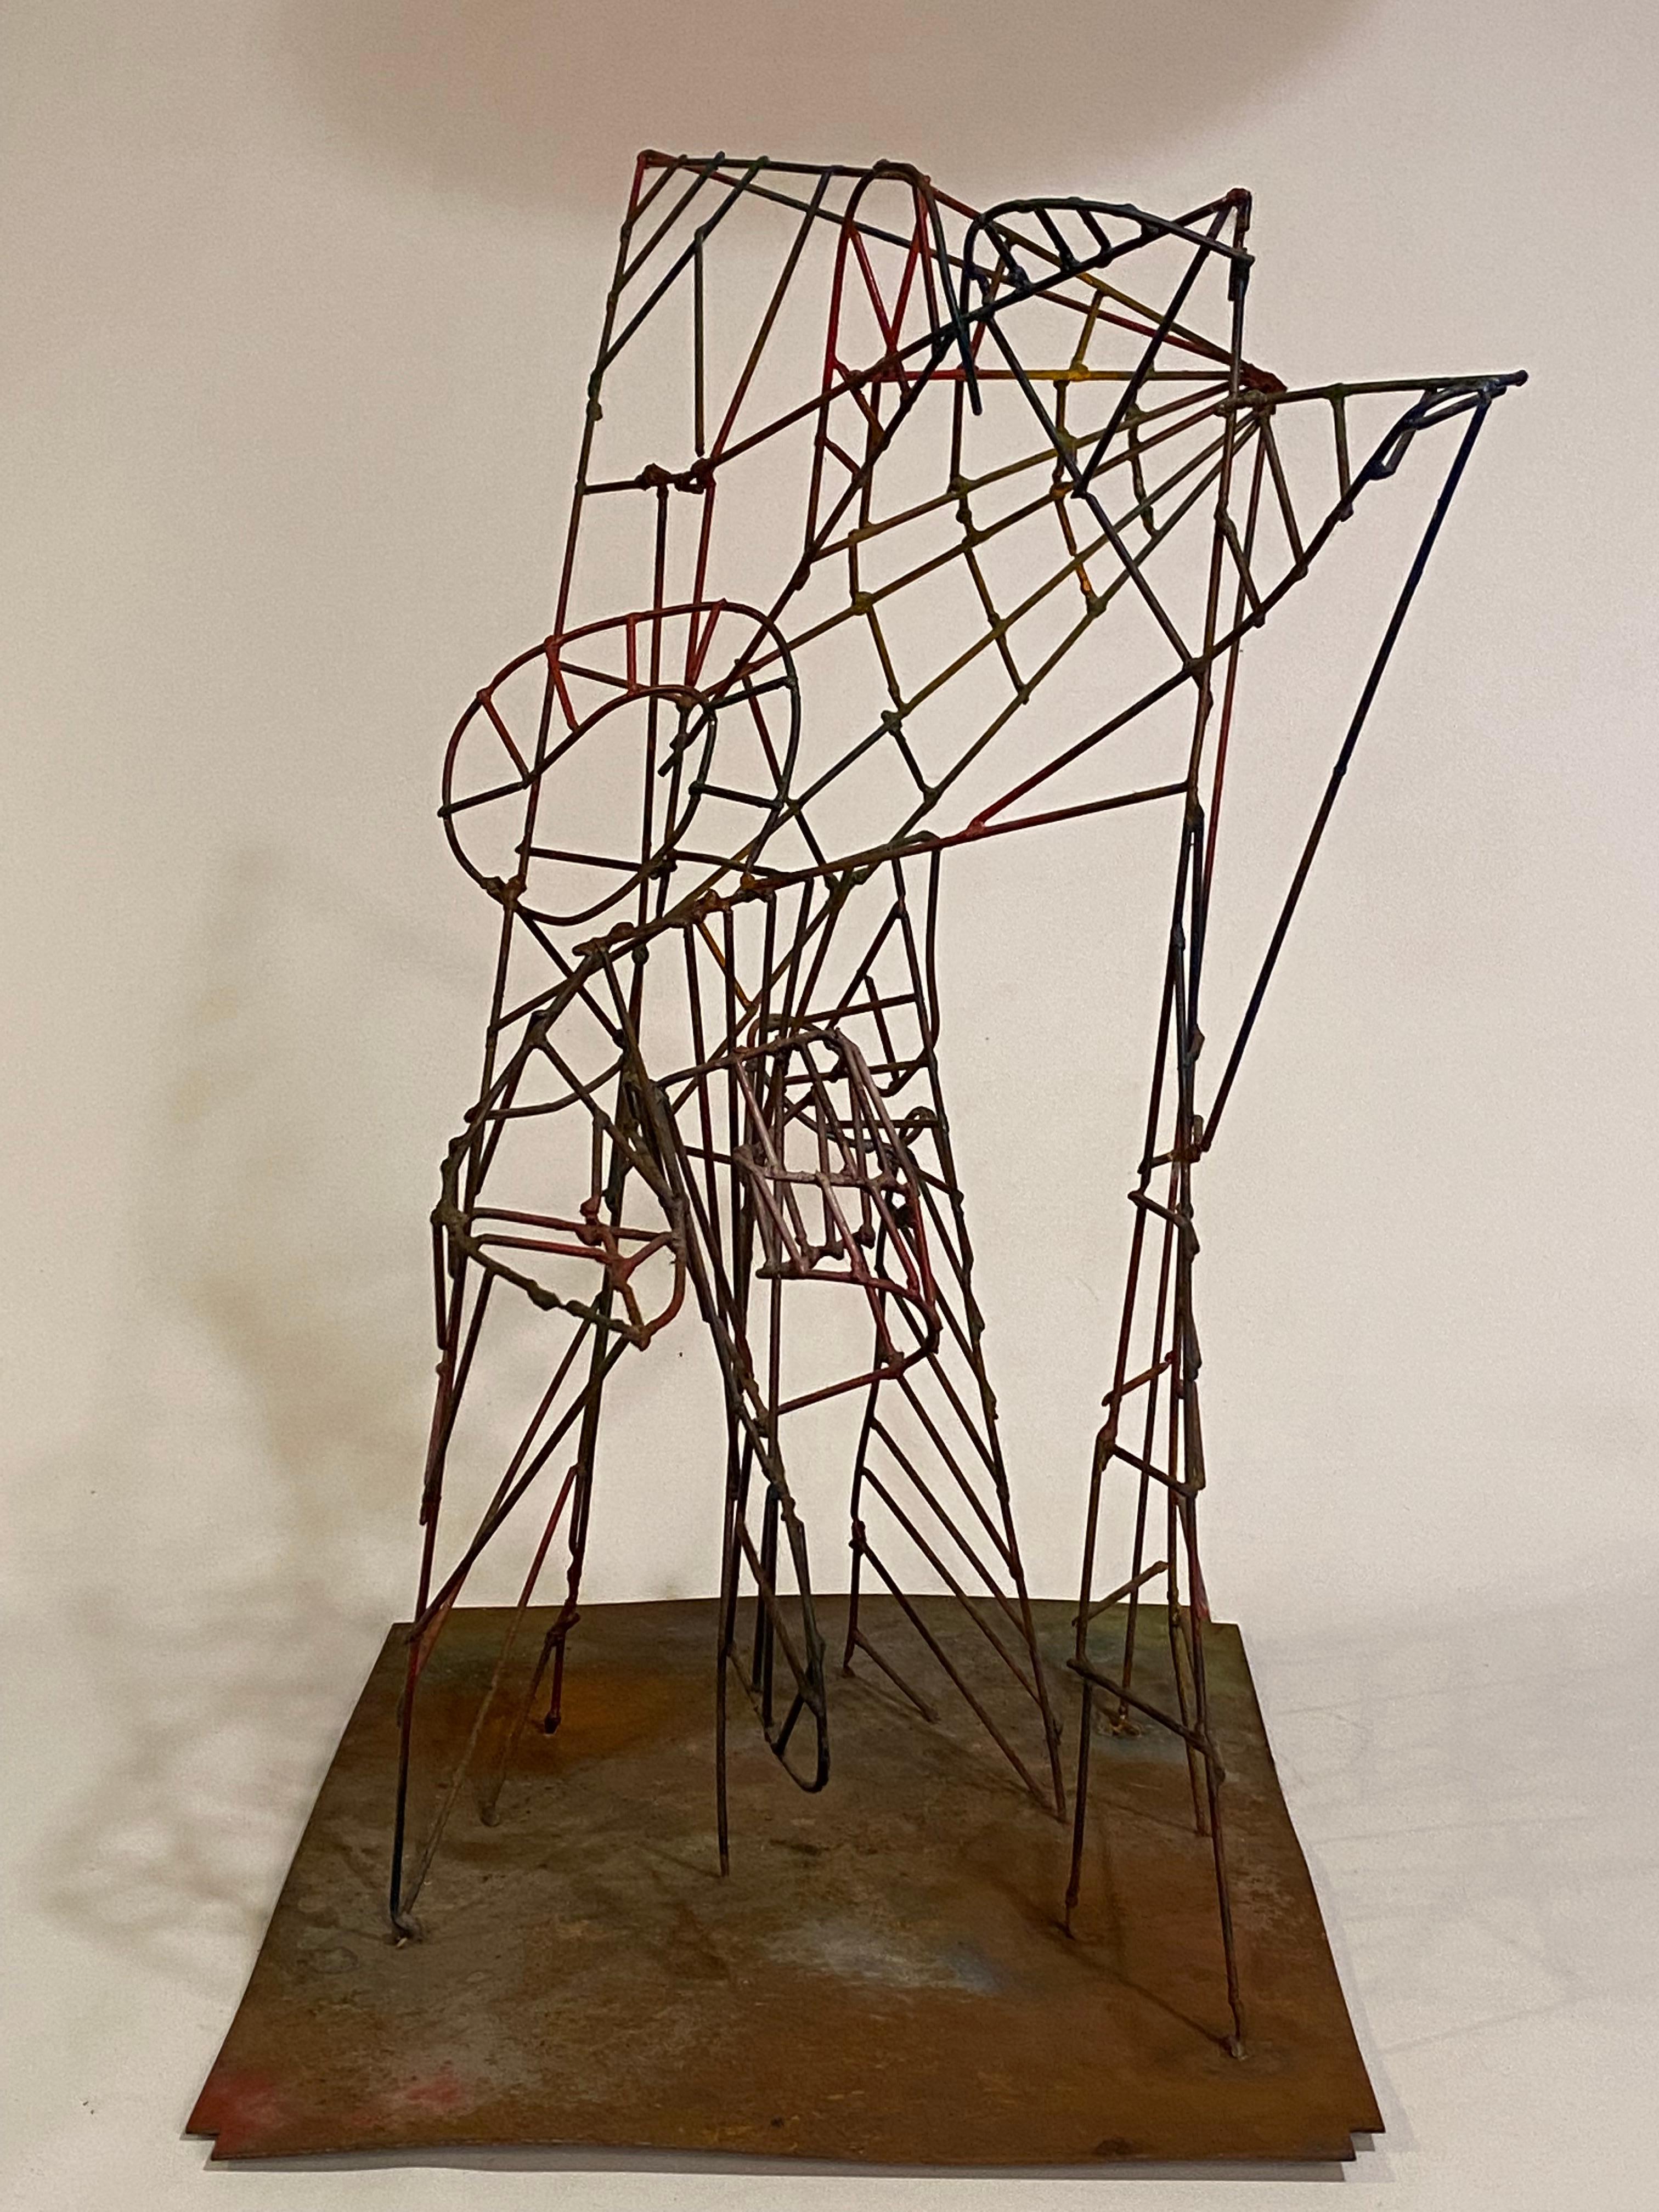 An amazing spider's web of a rollercoaster of design and line. This sculpture is just as delicate and light filled like a spider's web. A work that reaches, careens, and zigzags Constantly changing maze of line and perspective. Comprised of welded